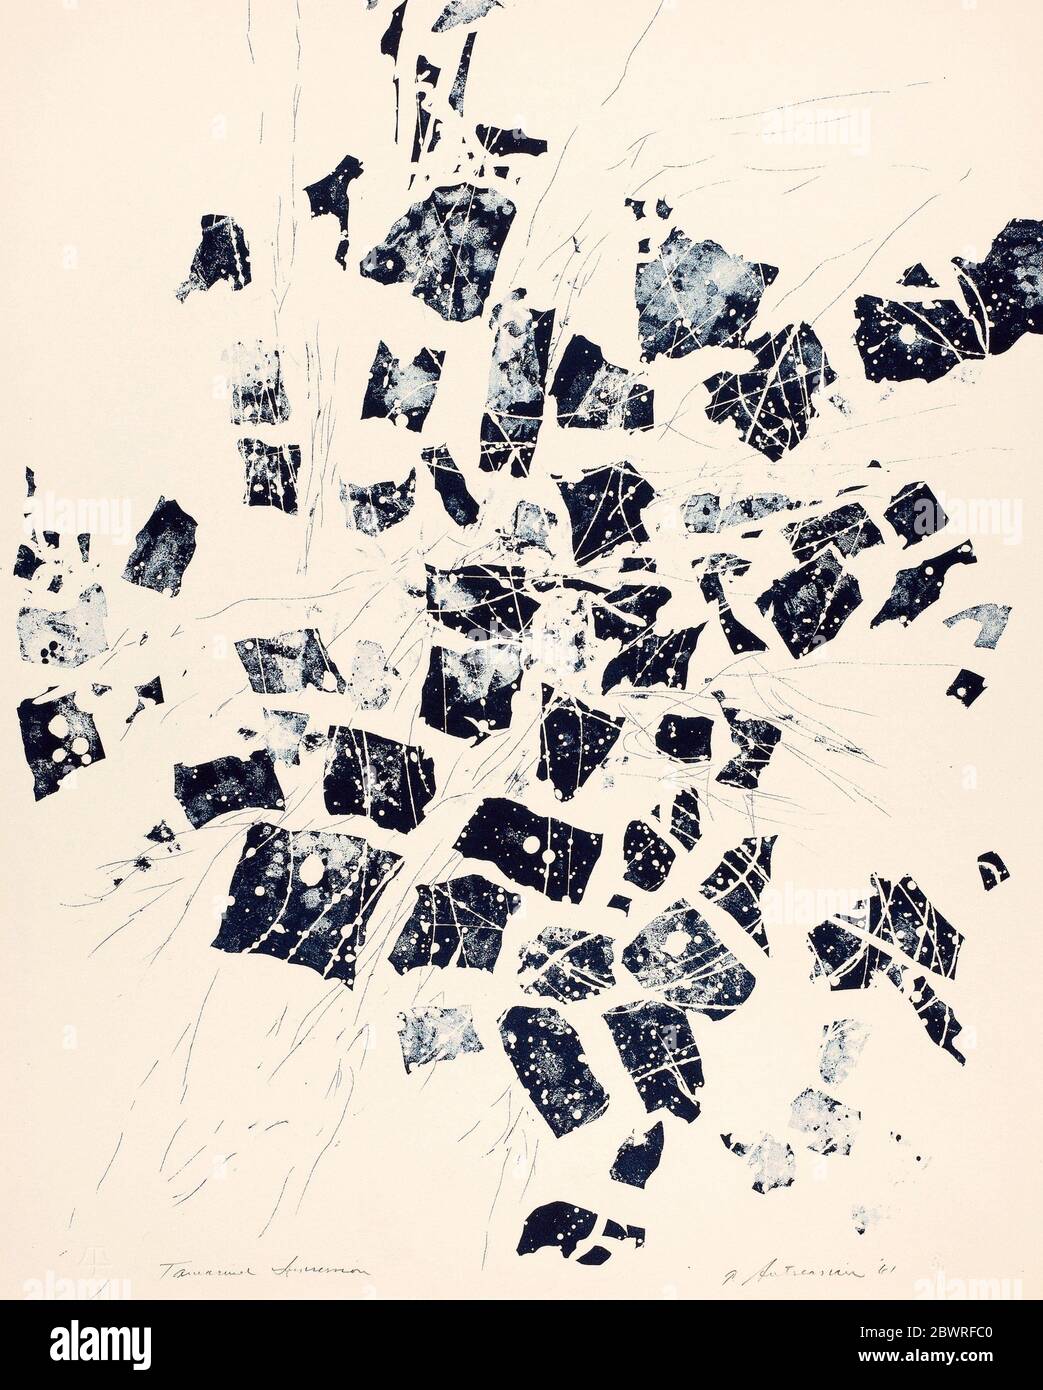 Author: Garo Antreasian. Untitled, plate V from Fragments - 1960/61 - Garo Antreasian (American, born 1922) printed by Garo Antreasian published by Stock Photo